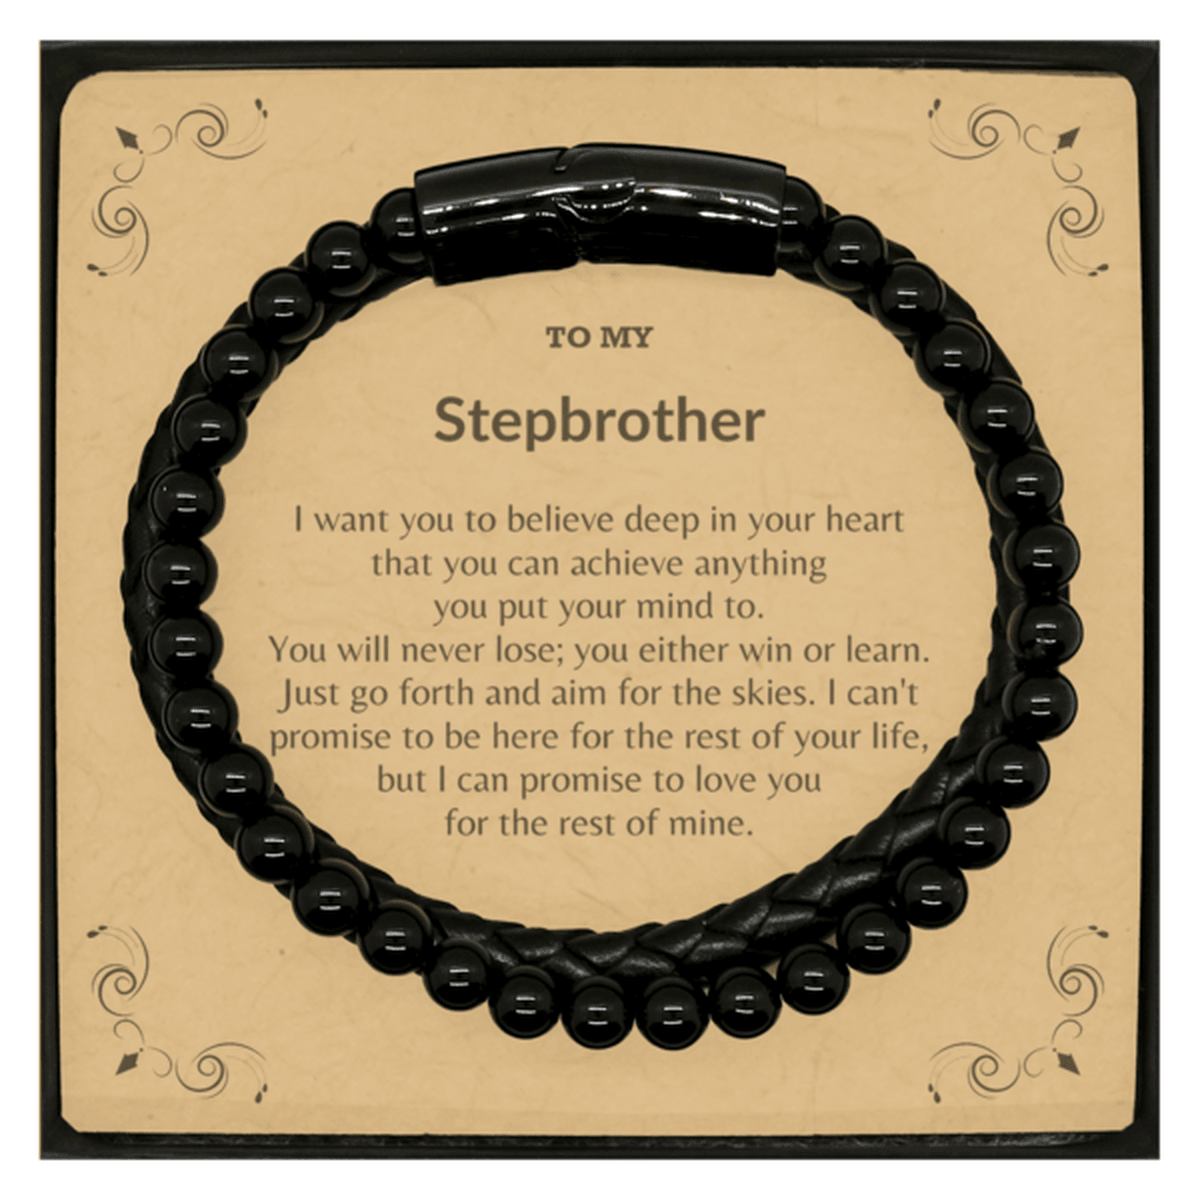 Motivational Stepbrother Stone Leather Bracelets, Stepbrother I can promise to love you for the rest of mine, Bracelet with Message Card For Stepbrother, Stepbrother Birthday Jewelry Gift for Women Men - Mallard Moon Gift Shop